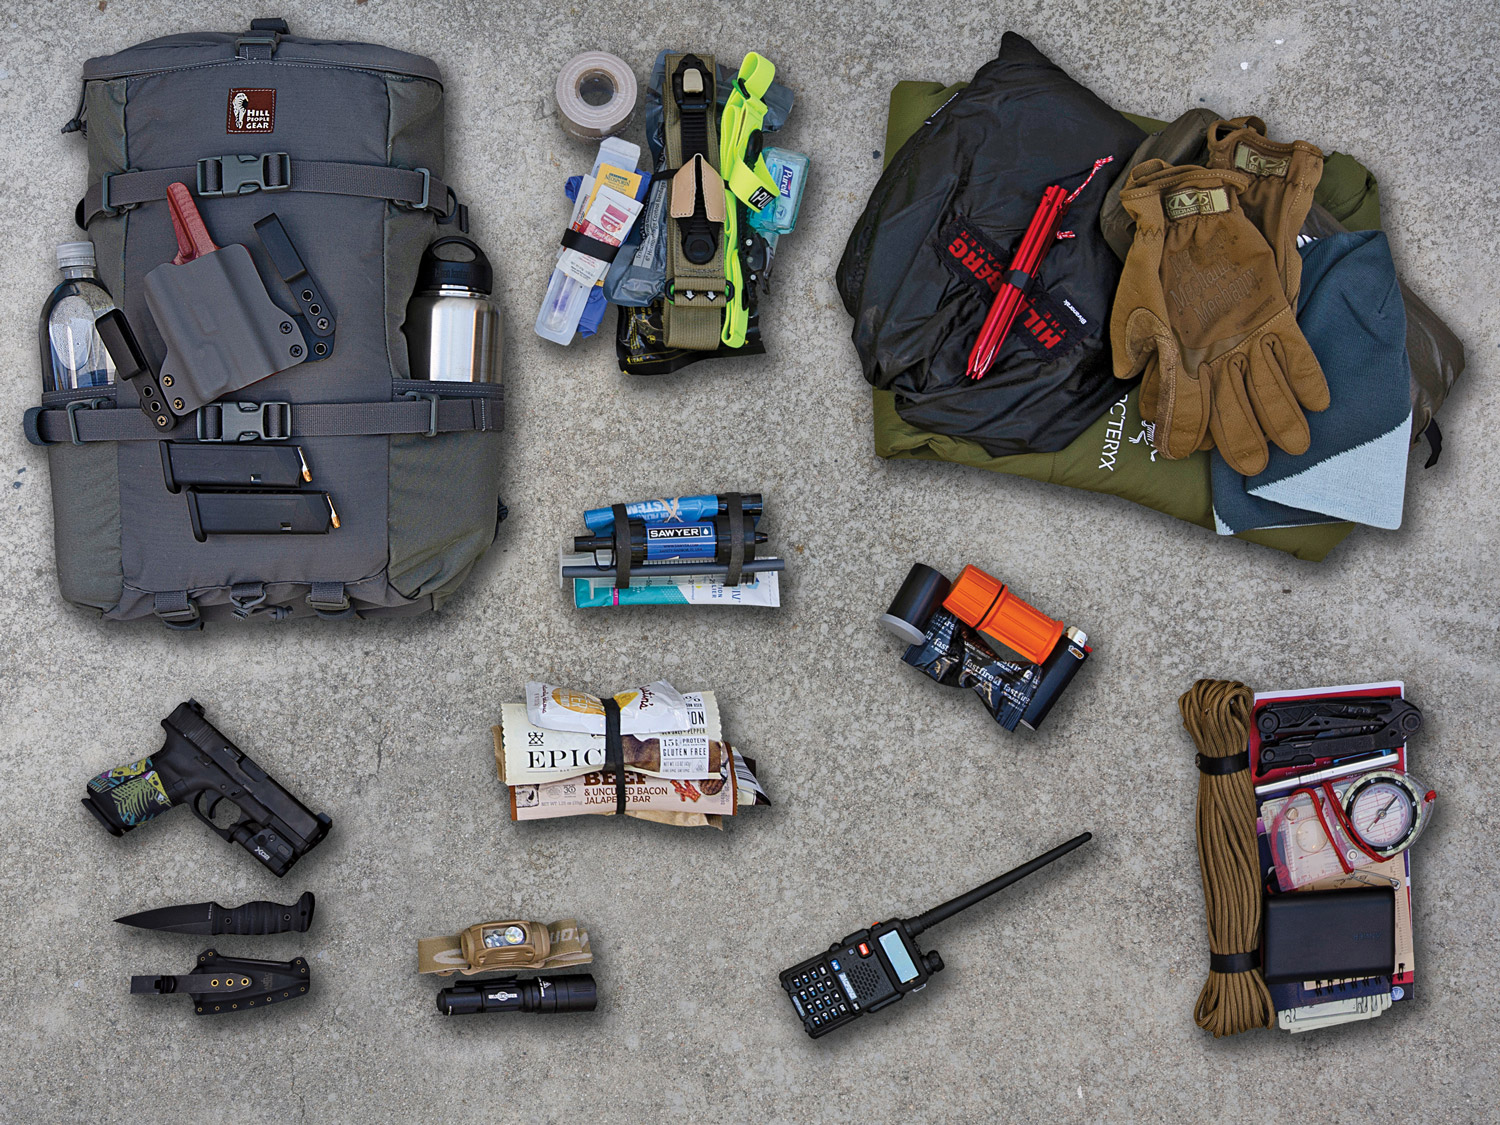 A collage of supplies and gear arranged on a concrete background.